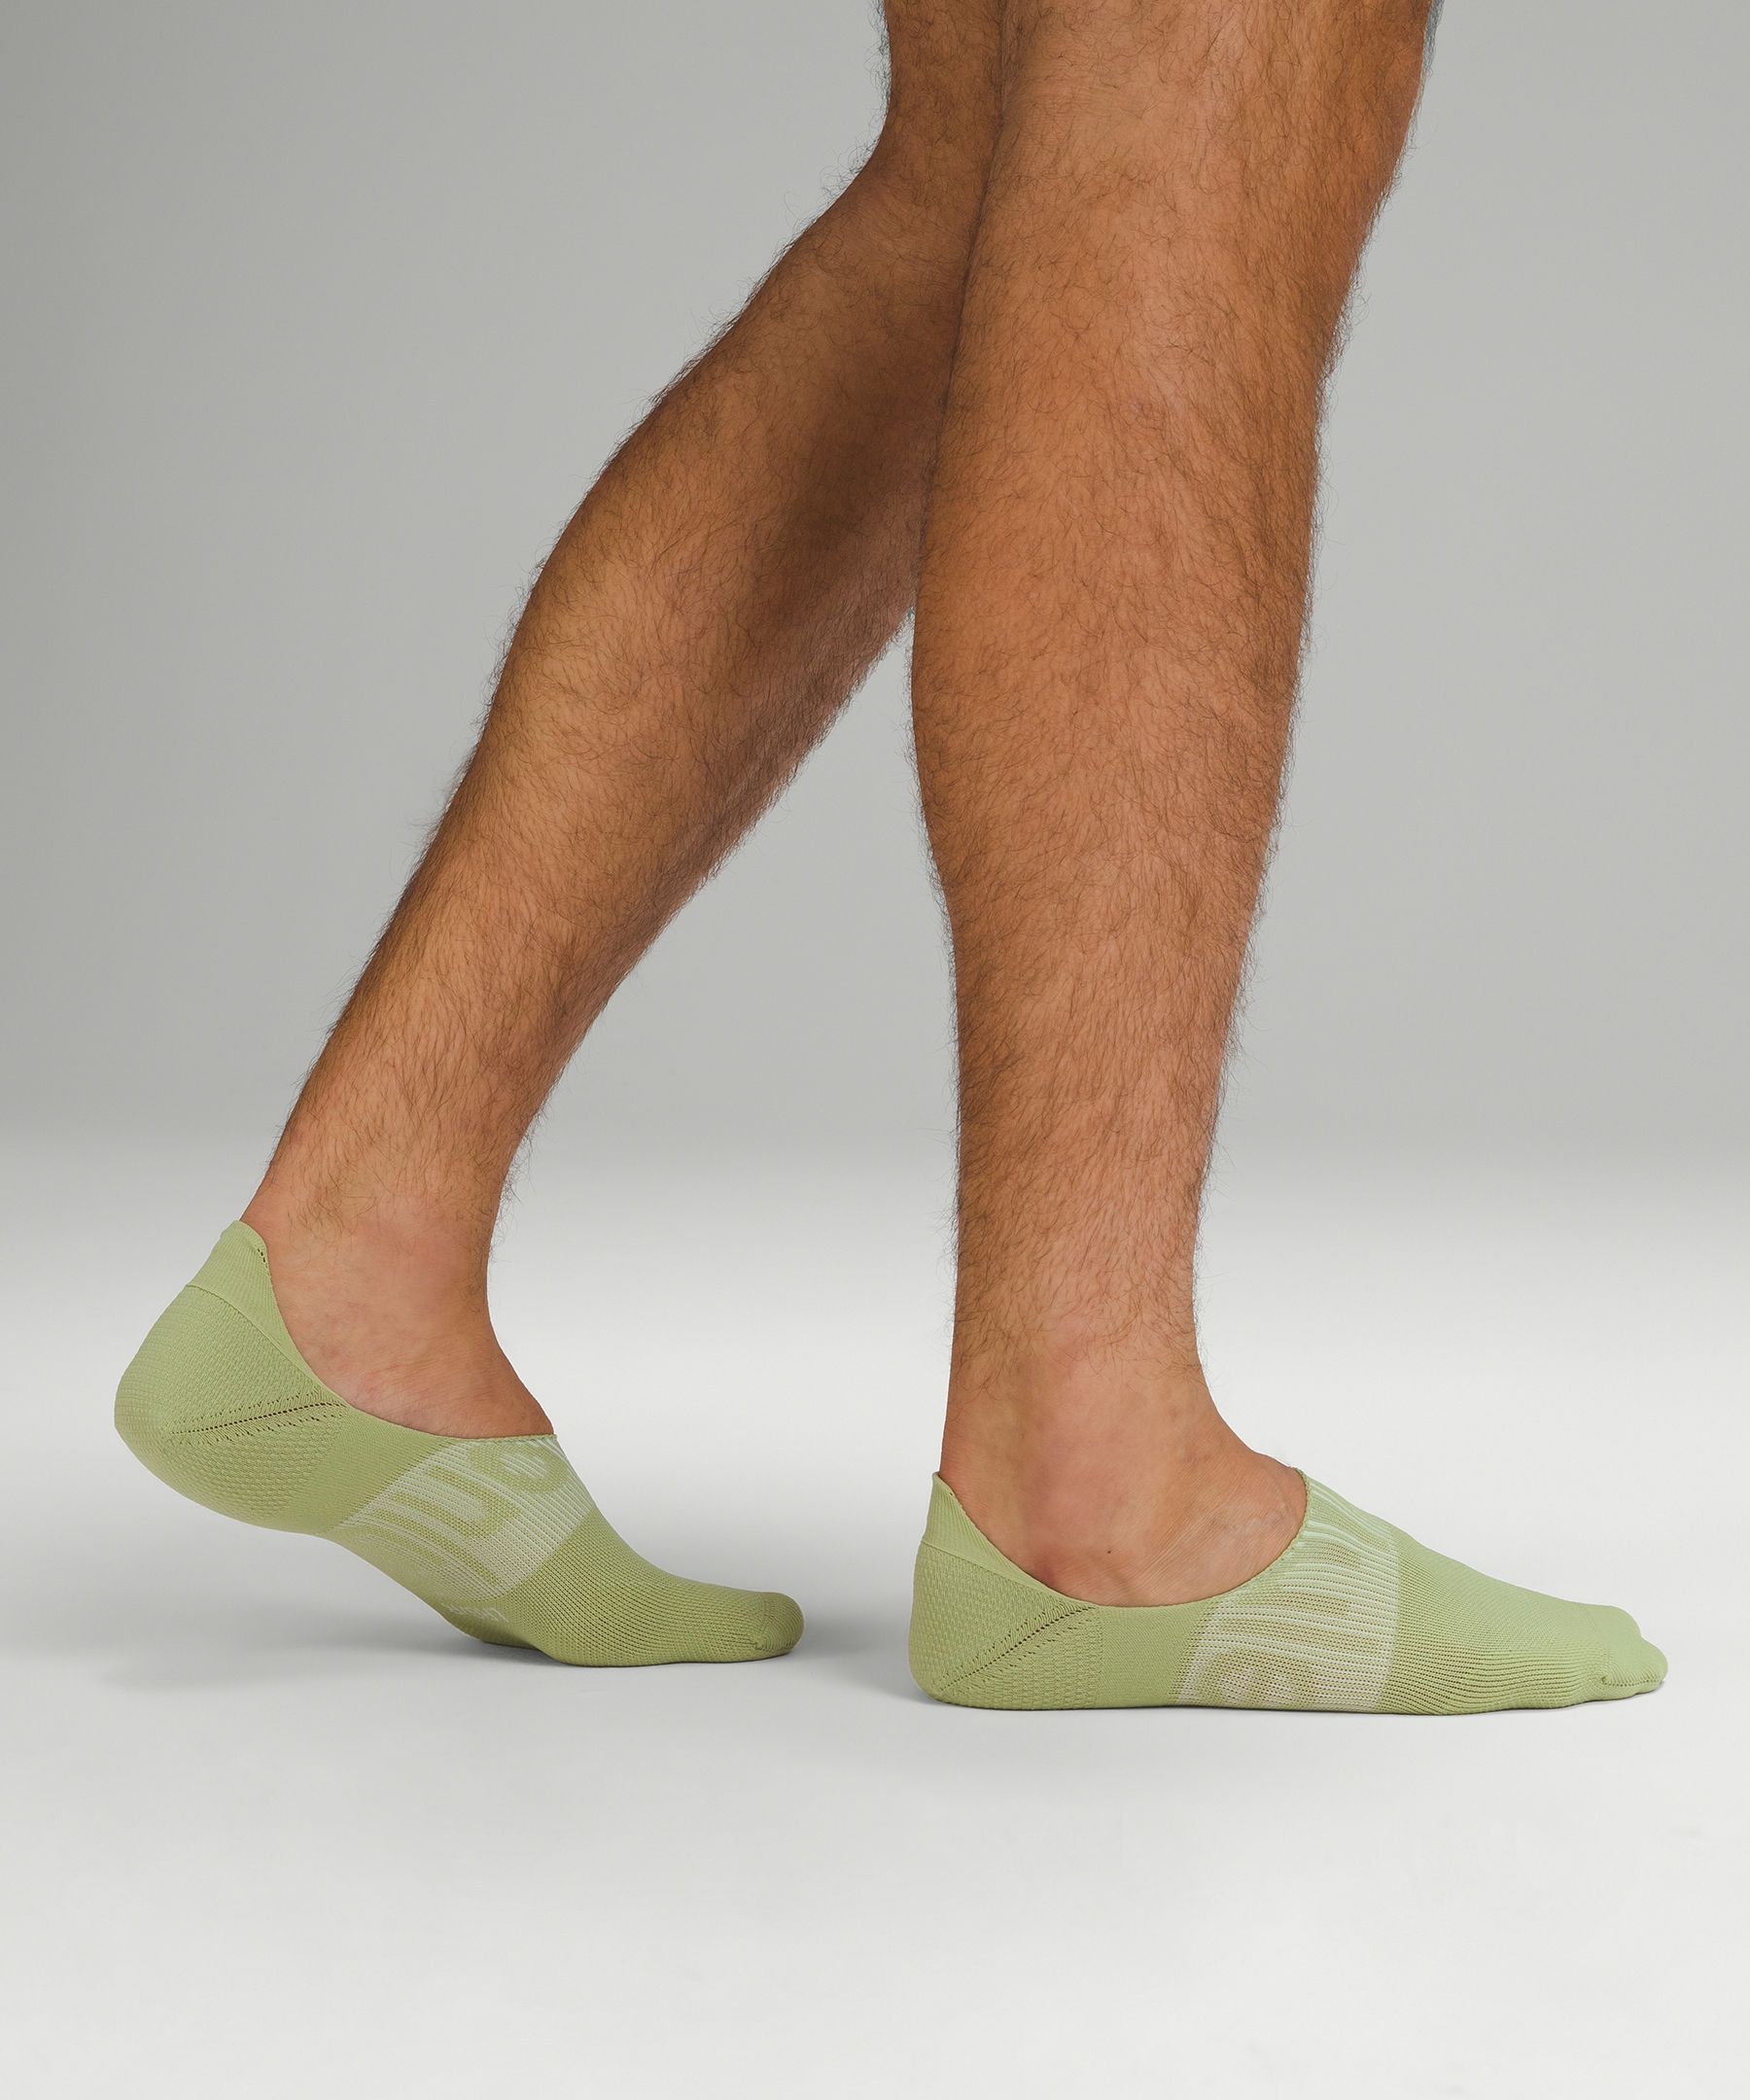 Lululemon Mens Power Stride No-Show Sock with Active Grip